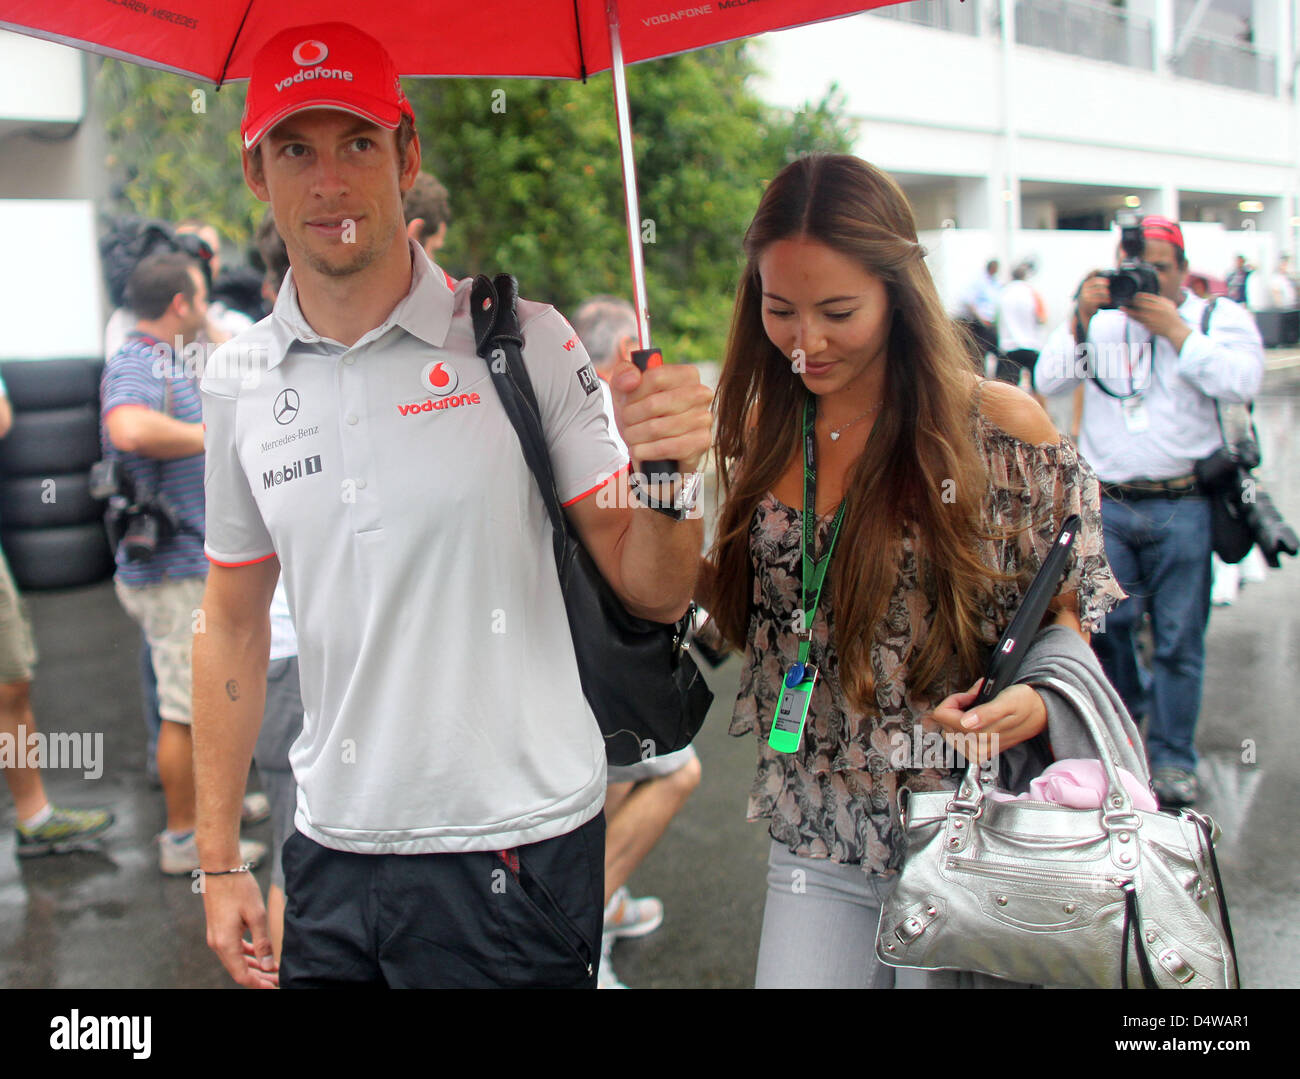 British Formula One driver Jenson Button of McLaren Mercedes and his girlfriend Jessica Michibata walk through the paddock in Singapore, 23 September 2010. The Formula One Night Race for the Singapore Grand Prix will take place at the Singapore Harbour race circuit on 26 September 2010. Photo: Jan Woitas Stock Photo